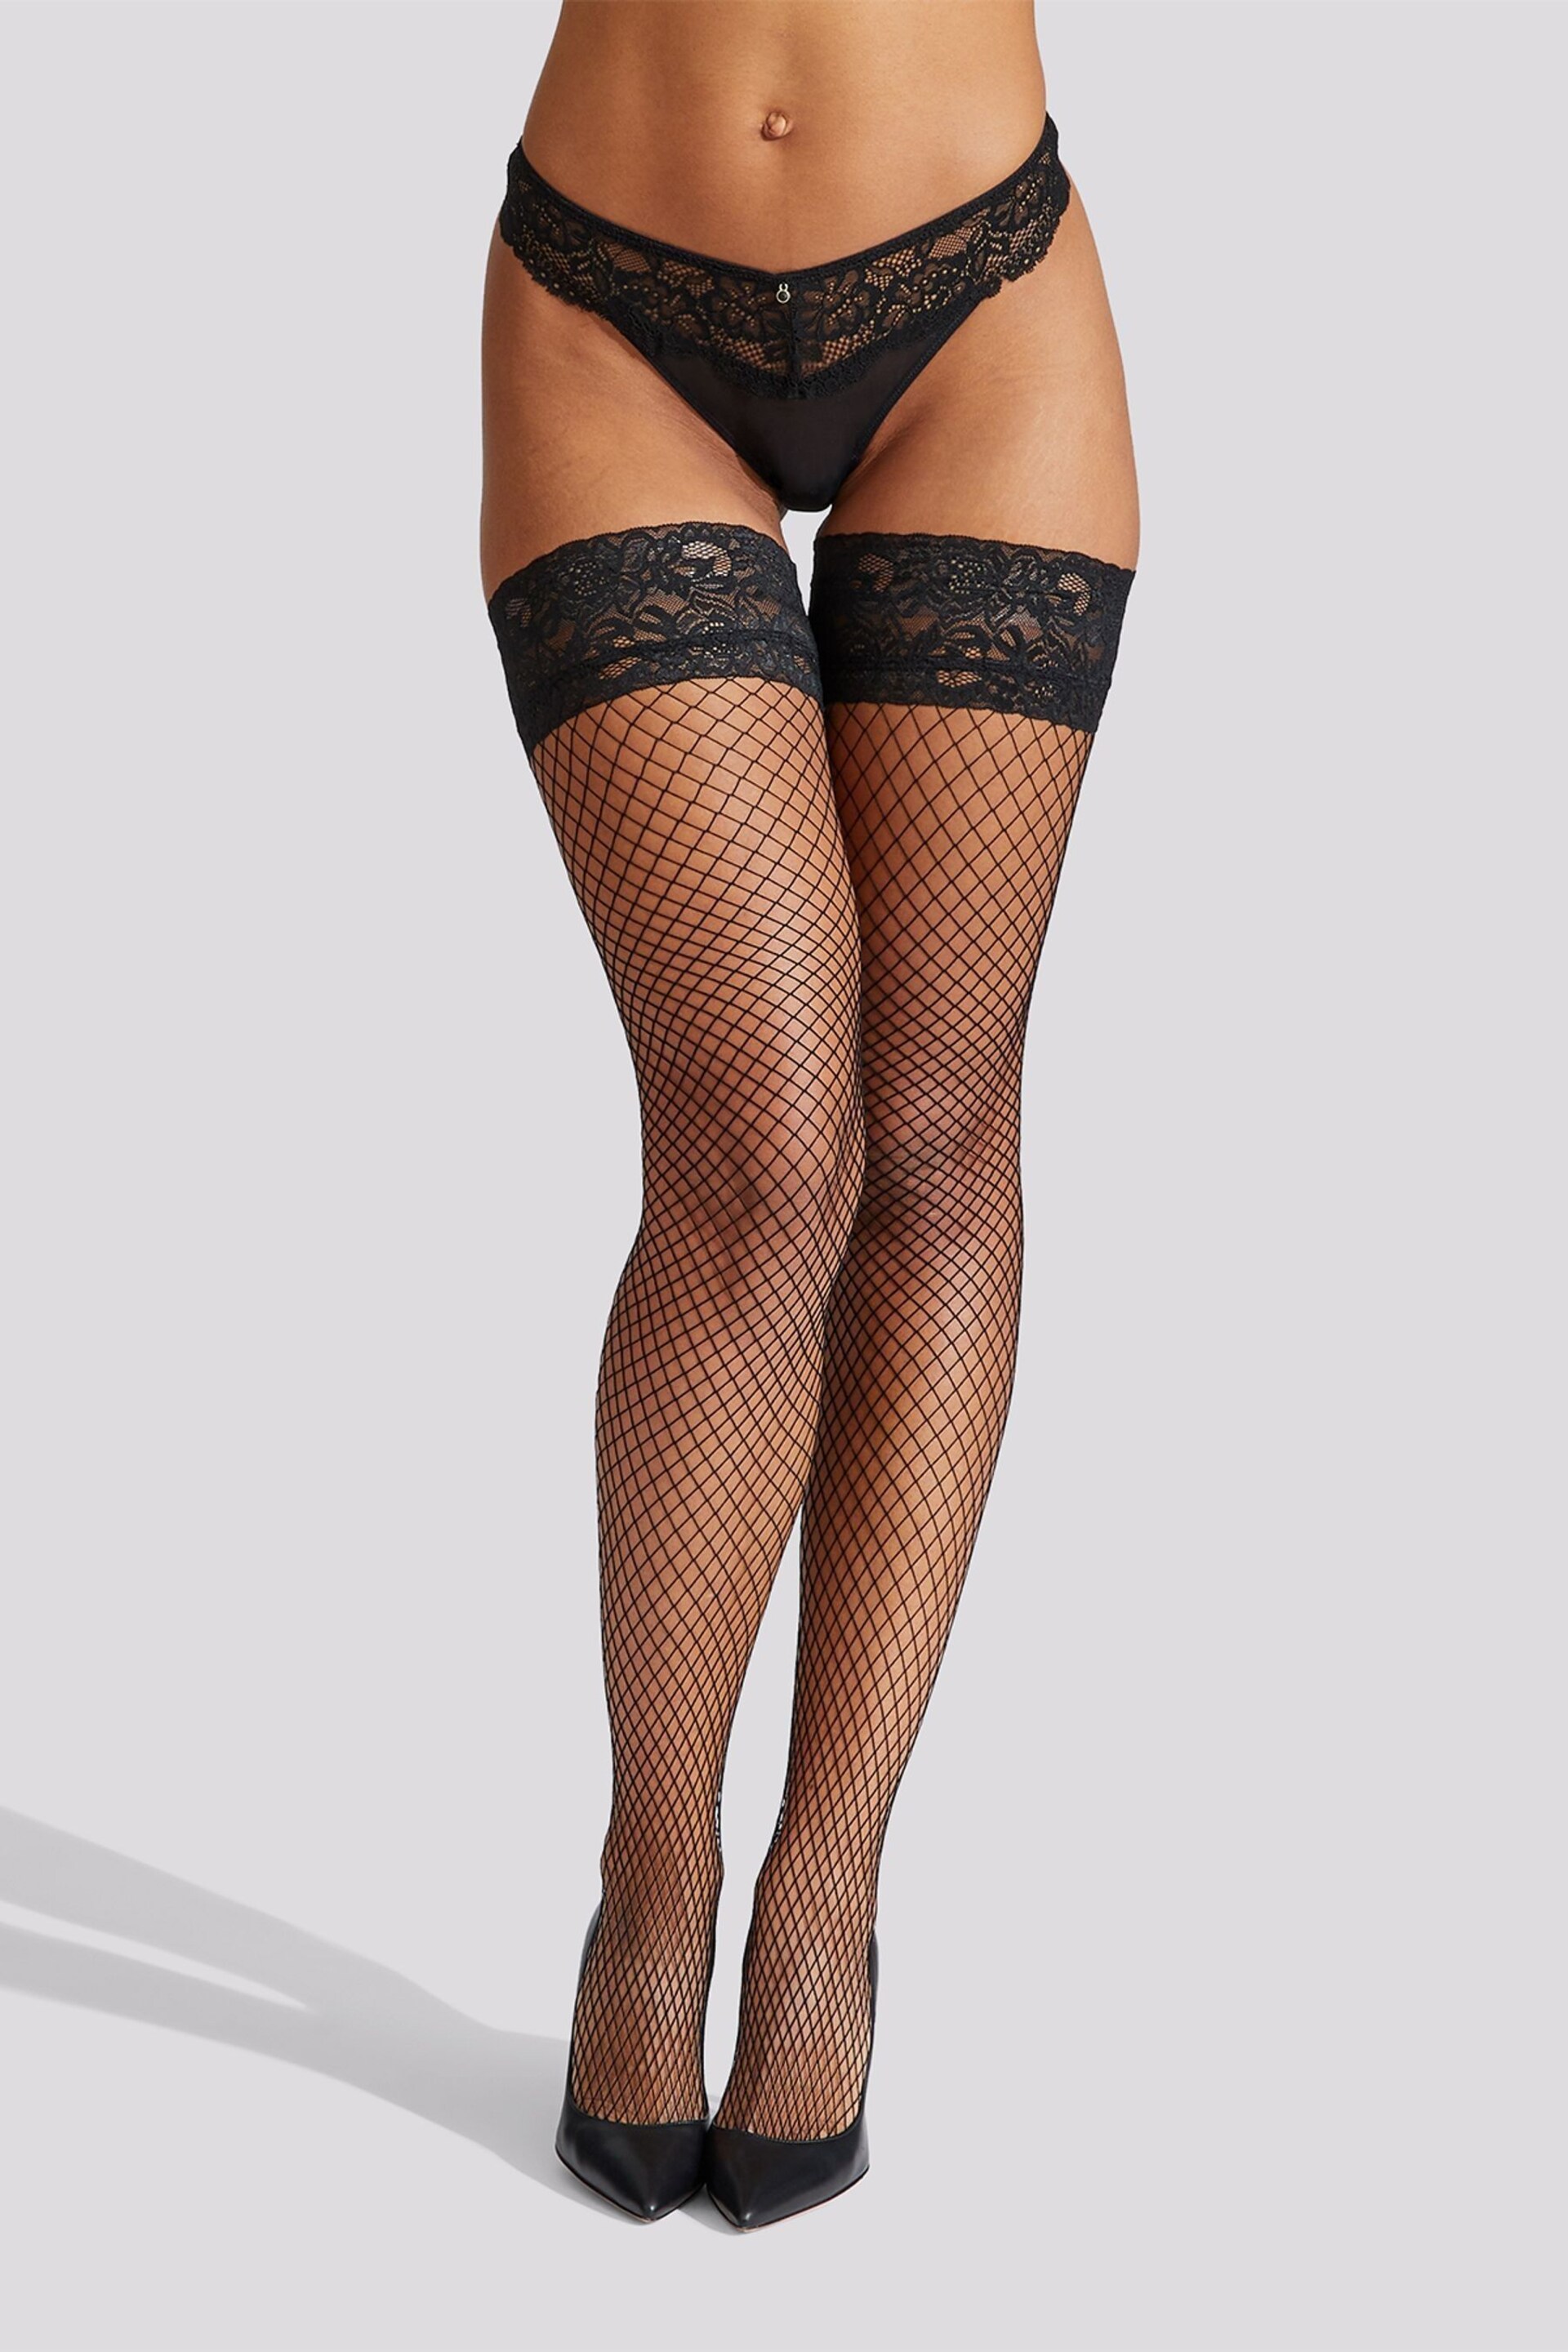 Ann Summers Lace Top Fishnet Black Hold-Ups - Image 1 of 3